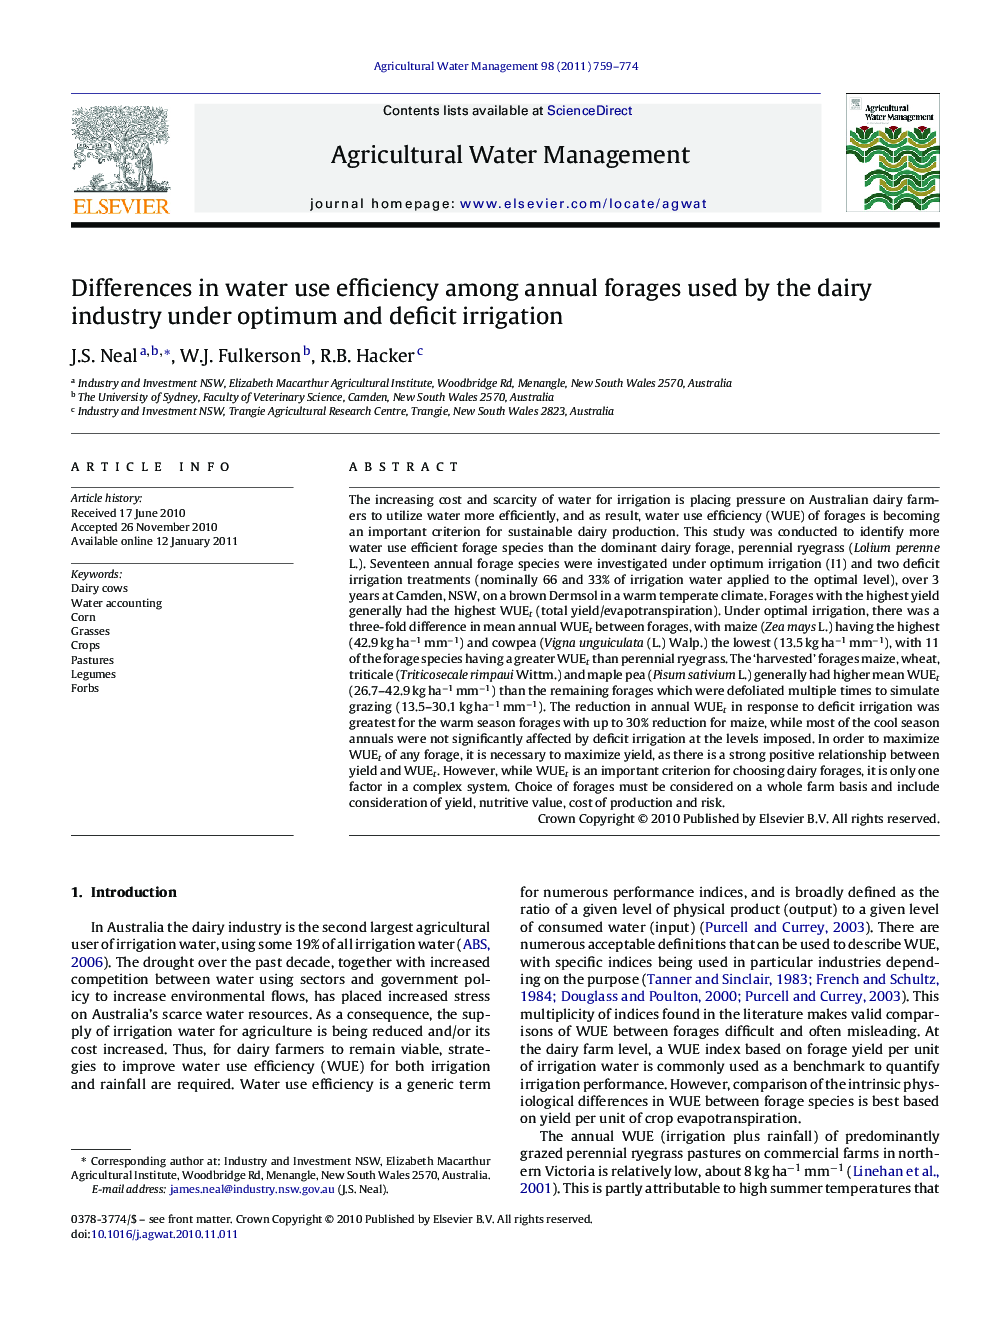 Differences in water use efficiency among annual forages used by the dairy industry under optimum and deficit irrigation